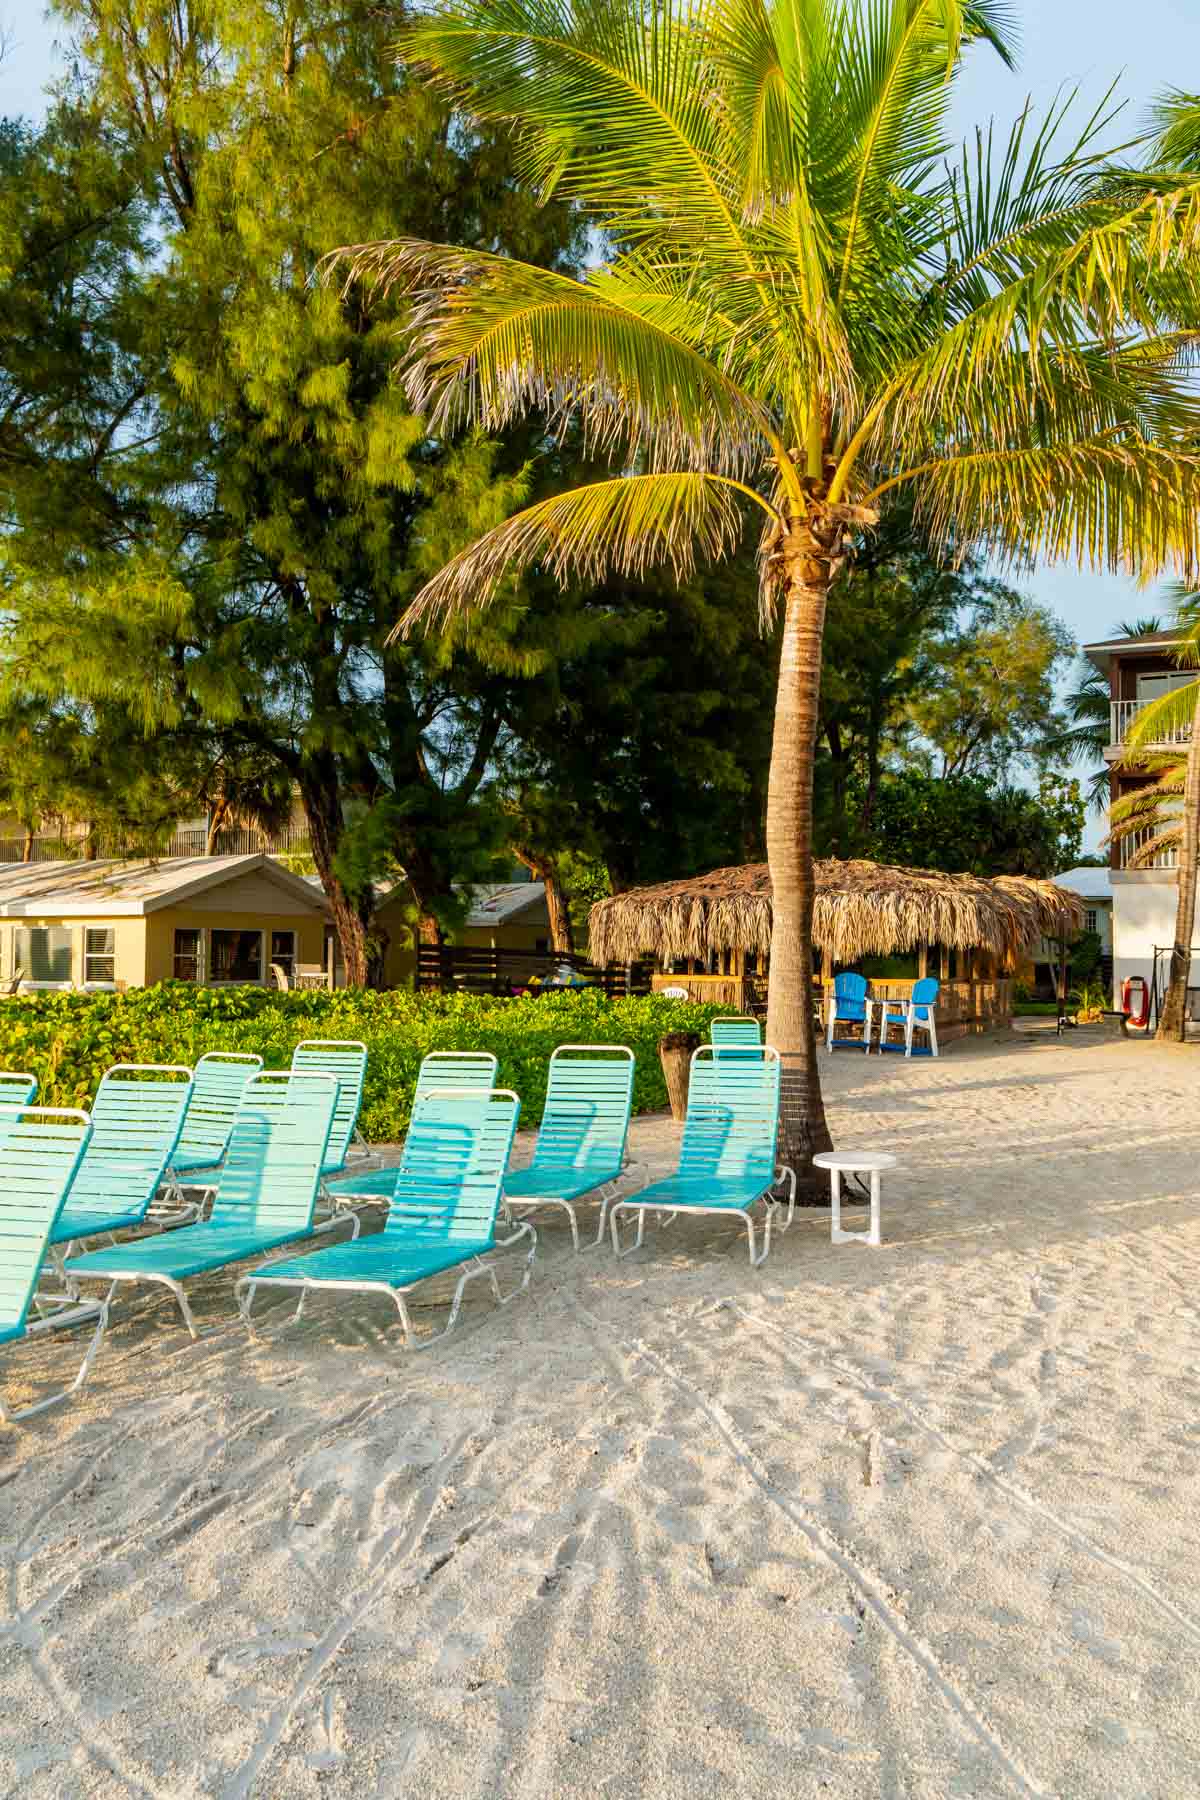 Beach chairs on a beach with palm trees